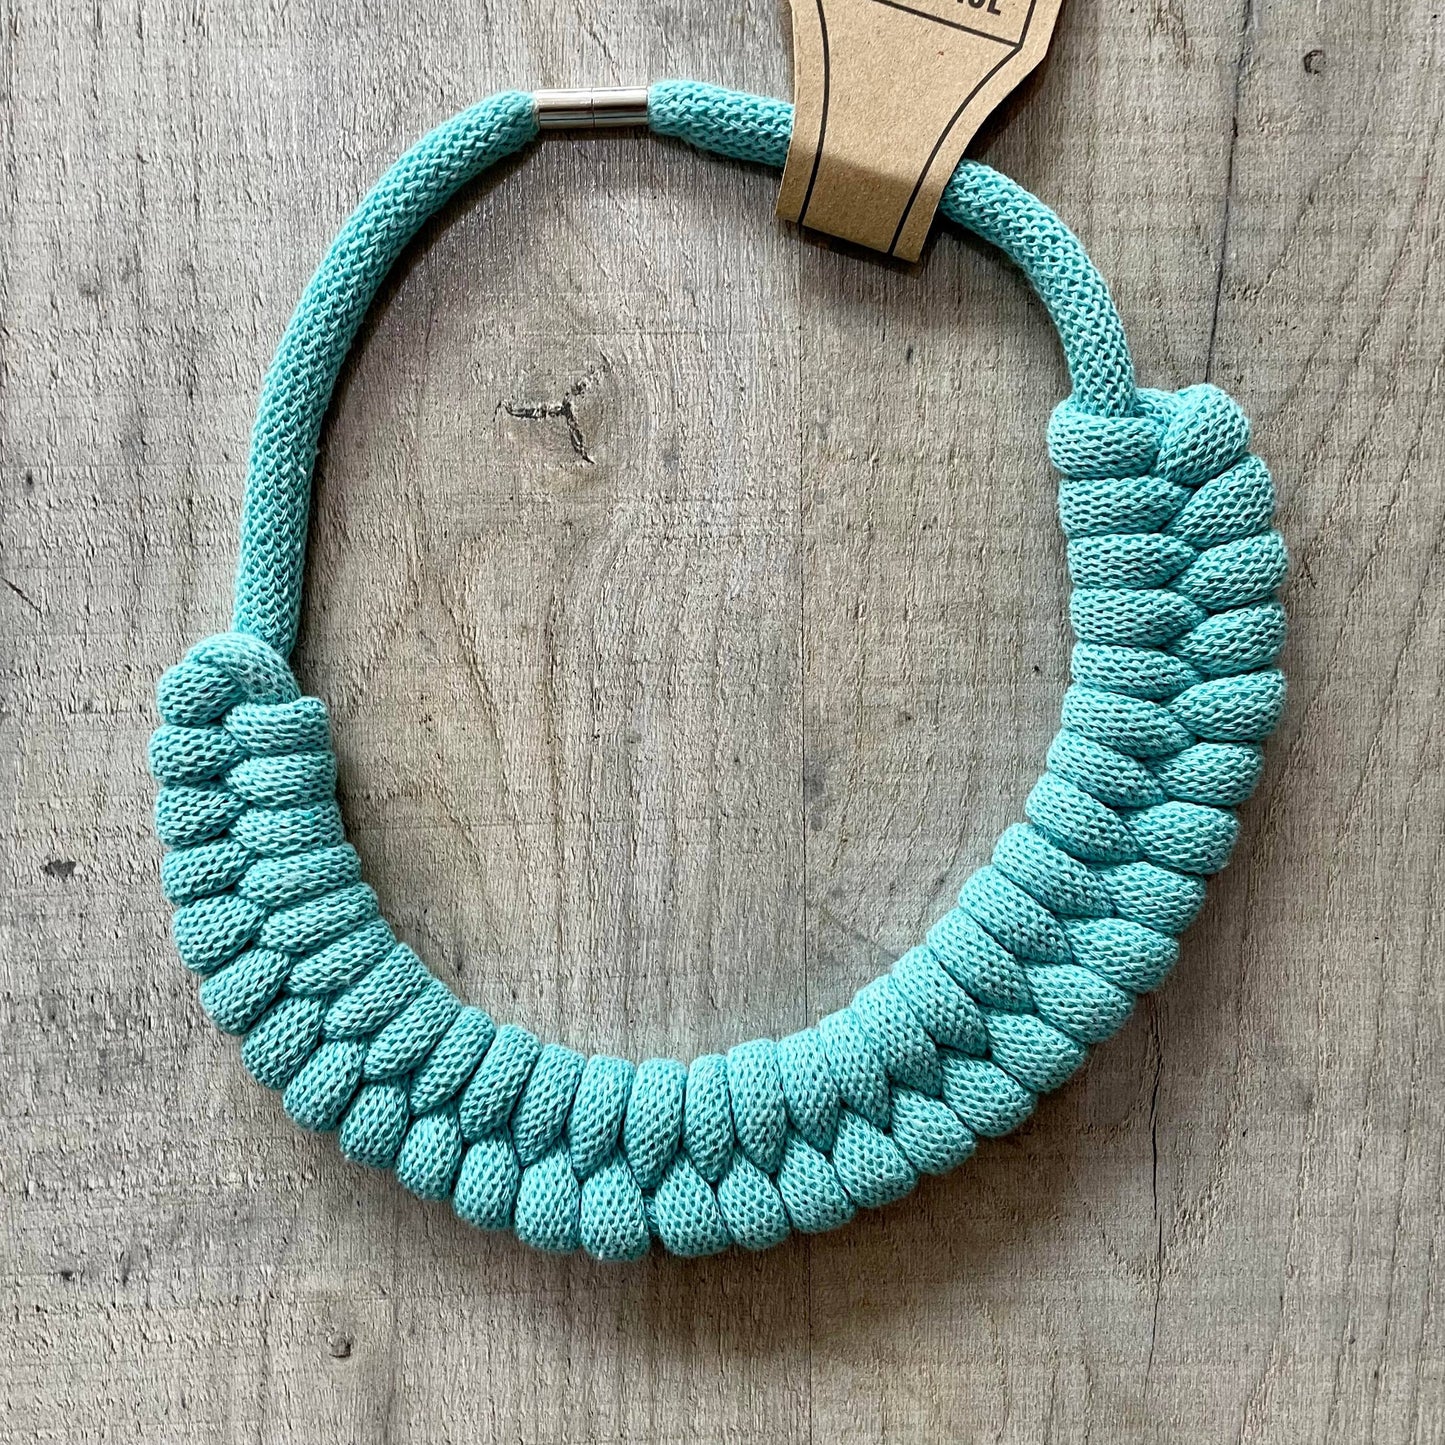 Woven Necklace